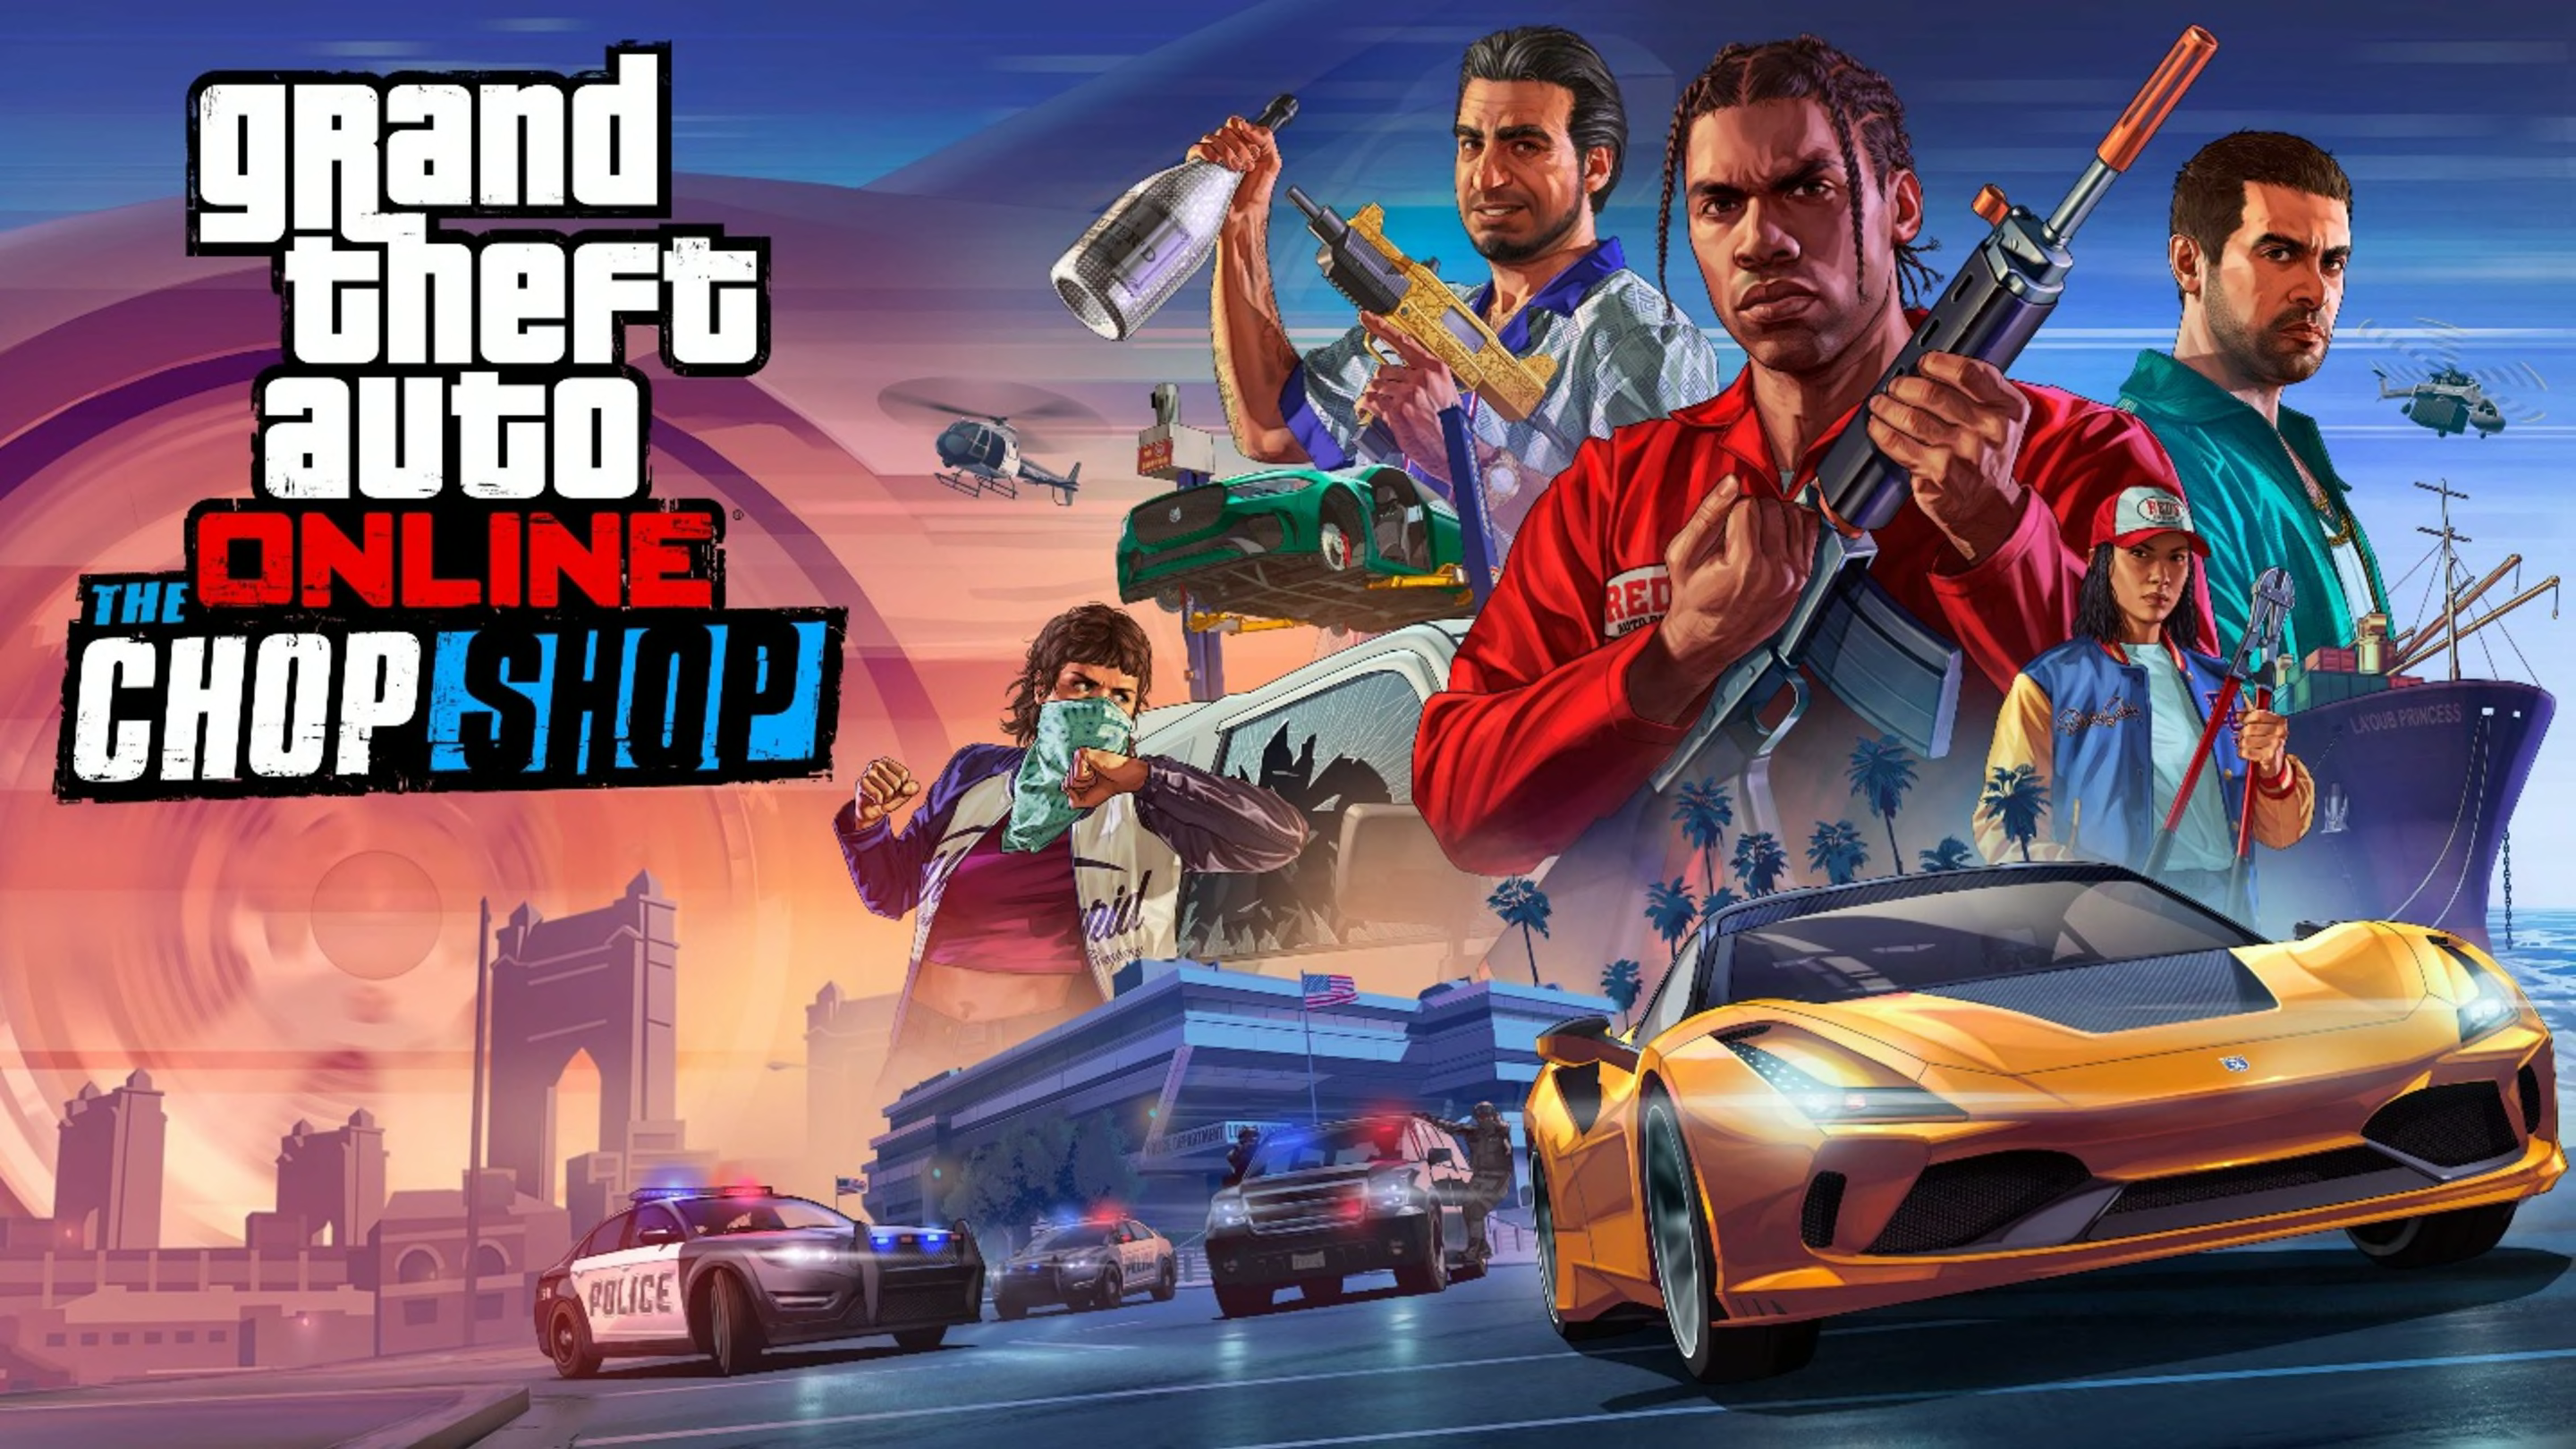 Take-Two asks MyMetaverse to take down its NFTs in GTA servers